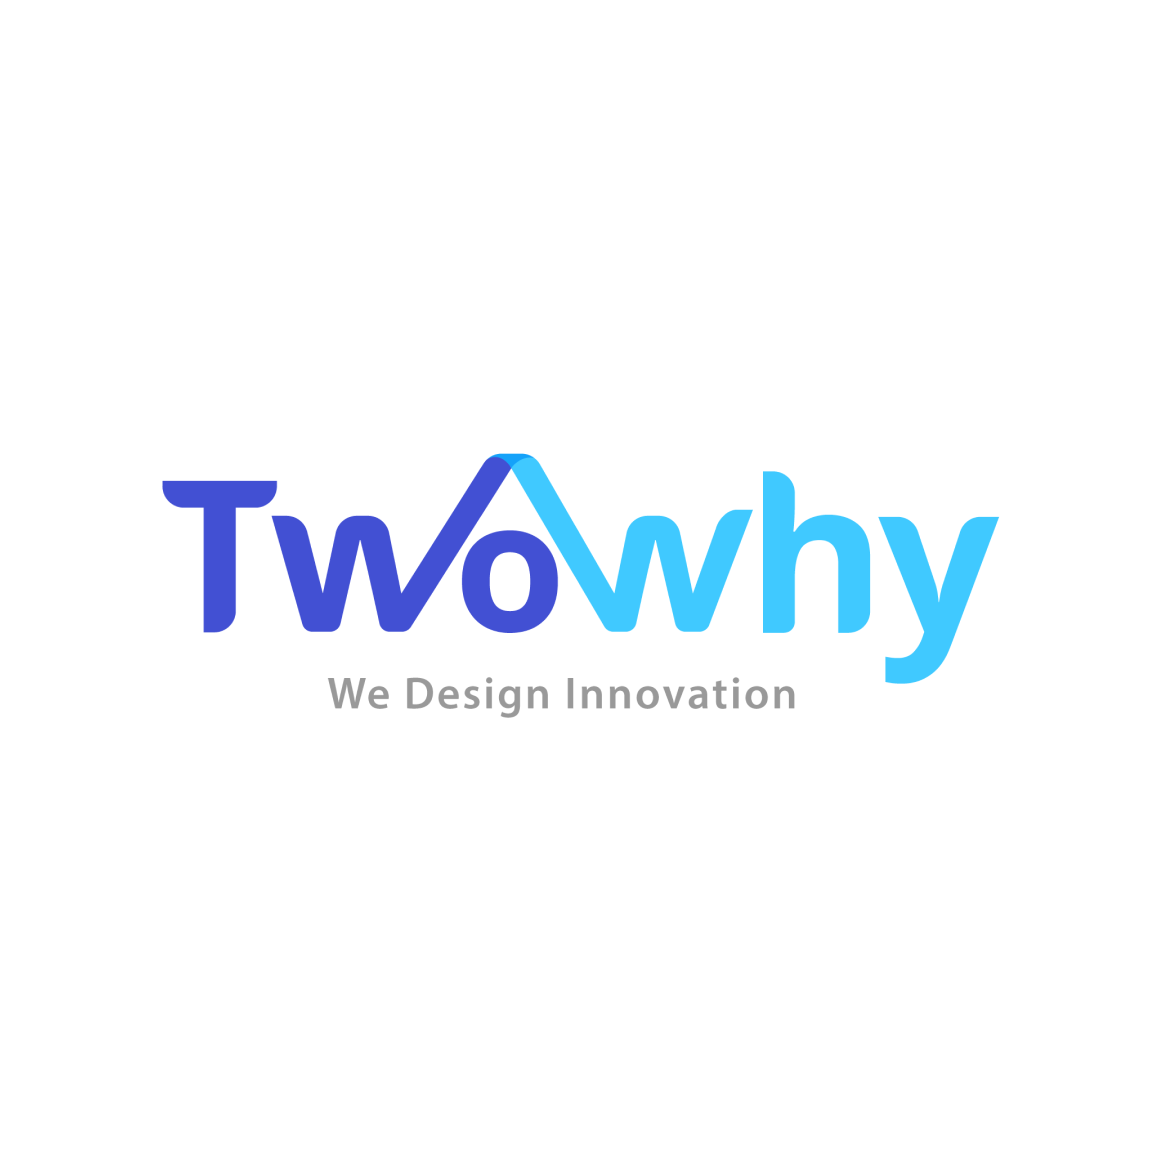 /assets/images/customer-interview/twowhy/twowhy-logo.png